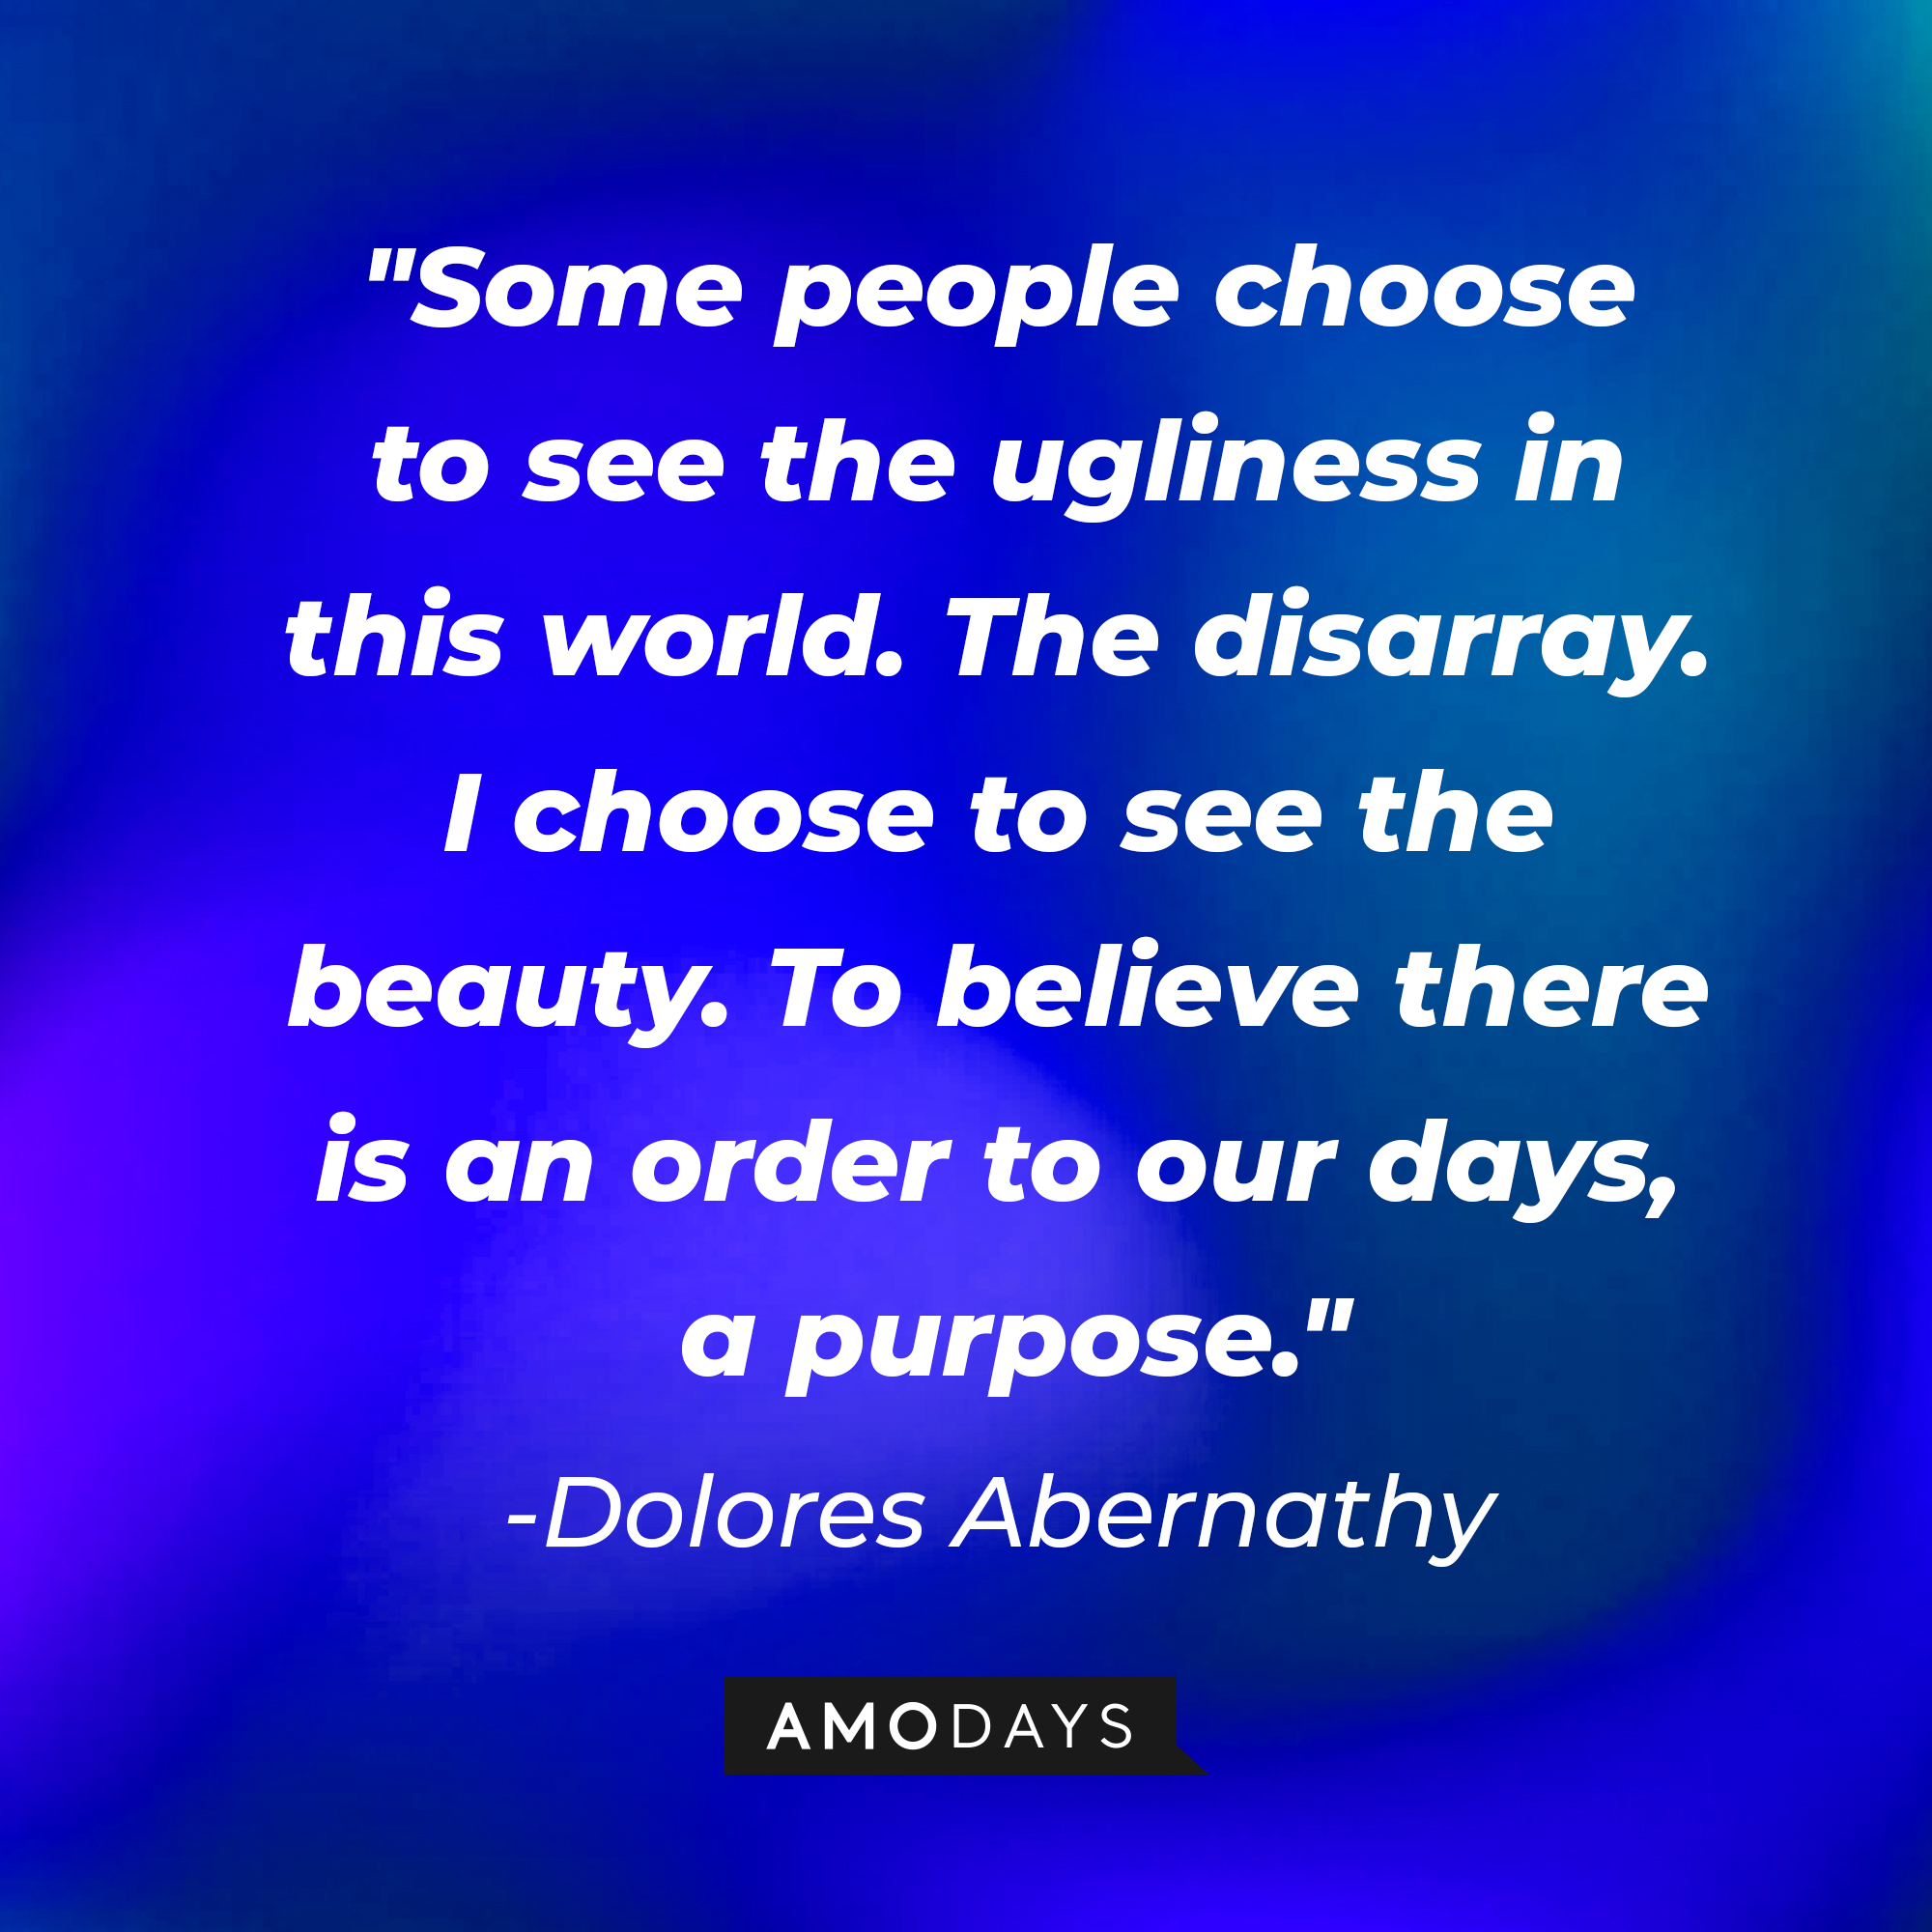 Dolores Abernathy's quote: "Some people choose to see the ugliness in this world. The disarray. I choose to see the beauty. To believe there is an order to our days, a purpose." | Source: AmoDays